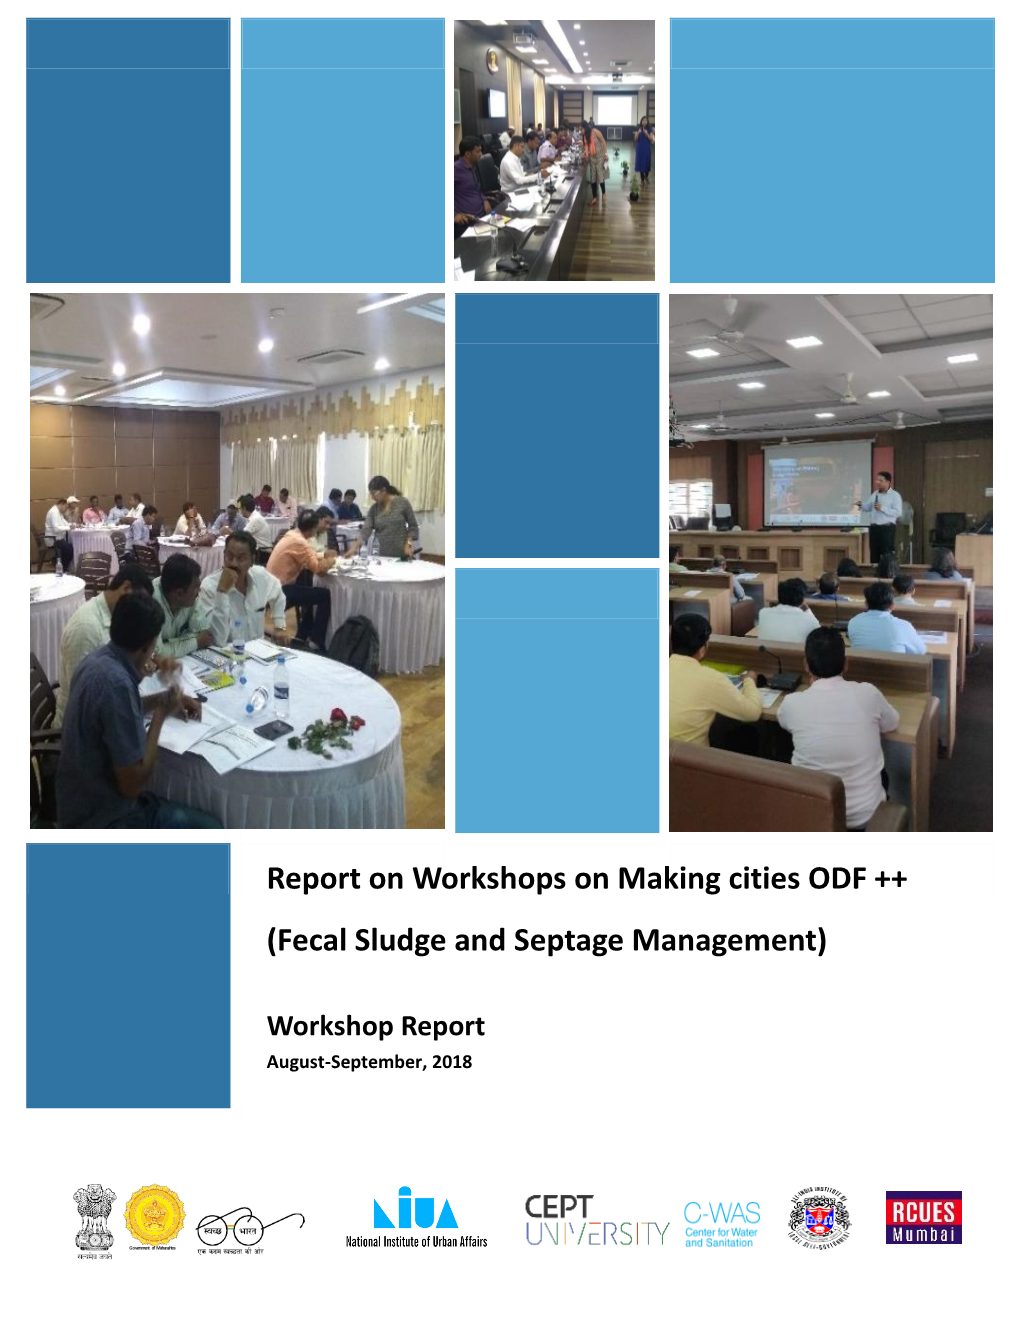 Report on Workshops on Making Cities ODF ++ (Fecal Sludge And